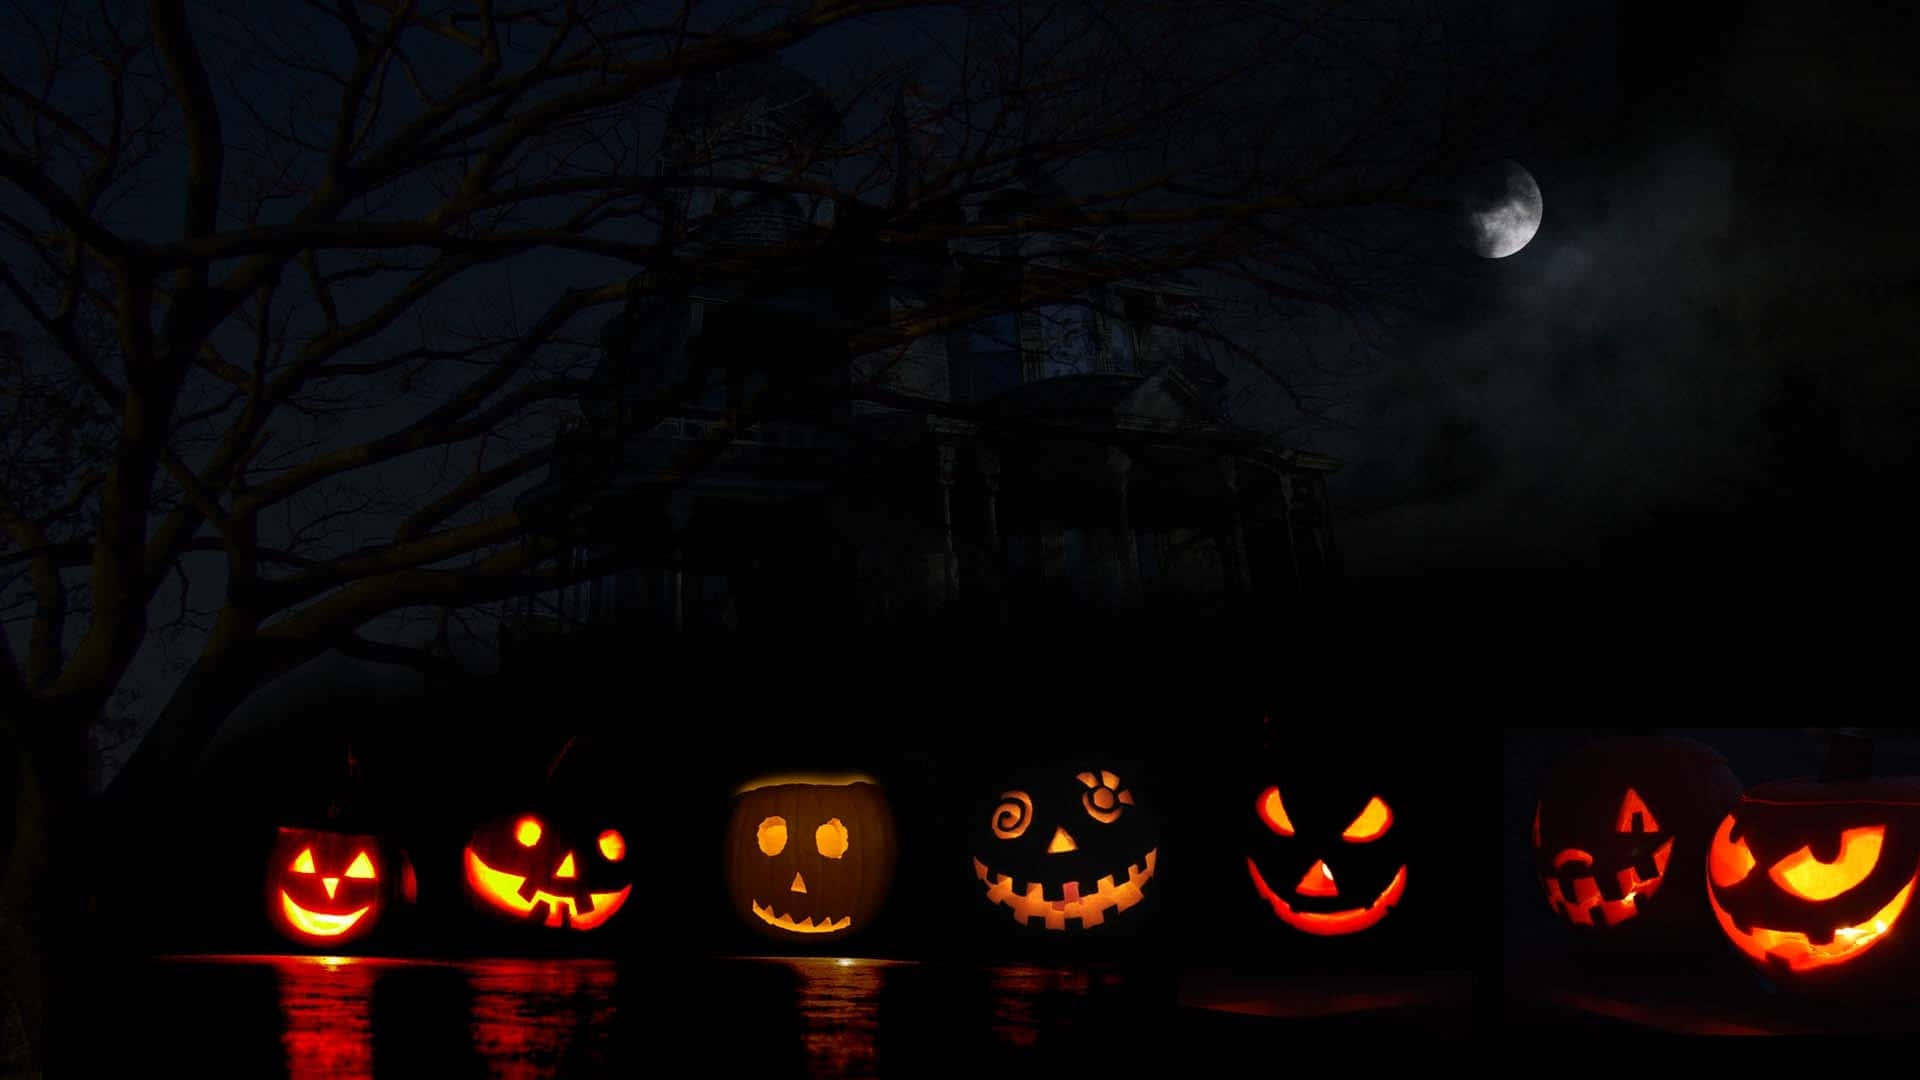 Pumpkins With Different Expressions Aesthetic Creepy Halloween Background